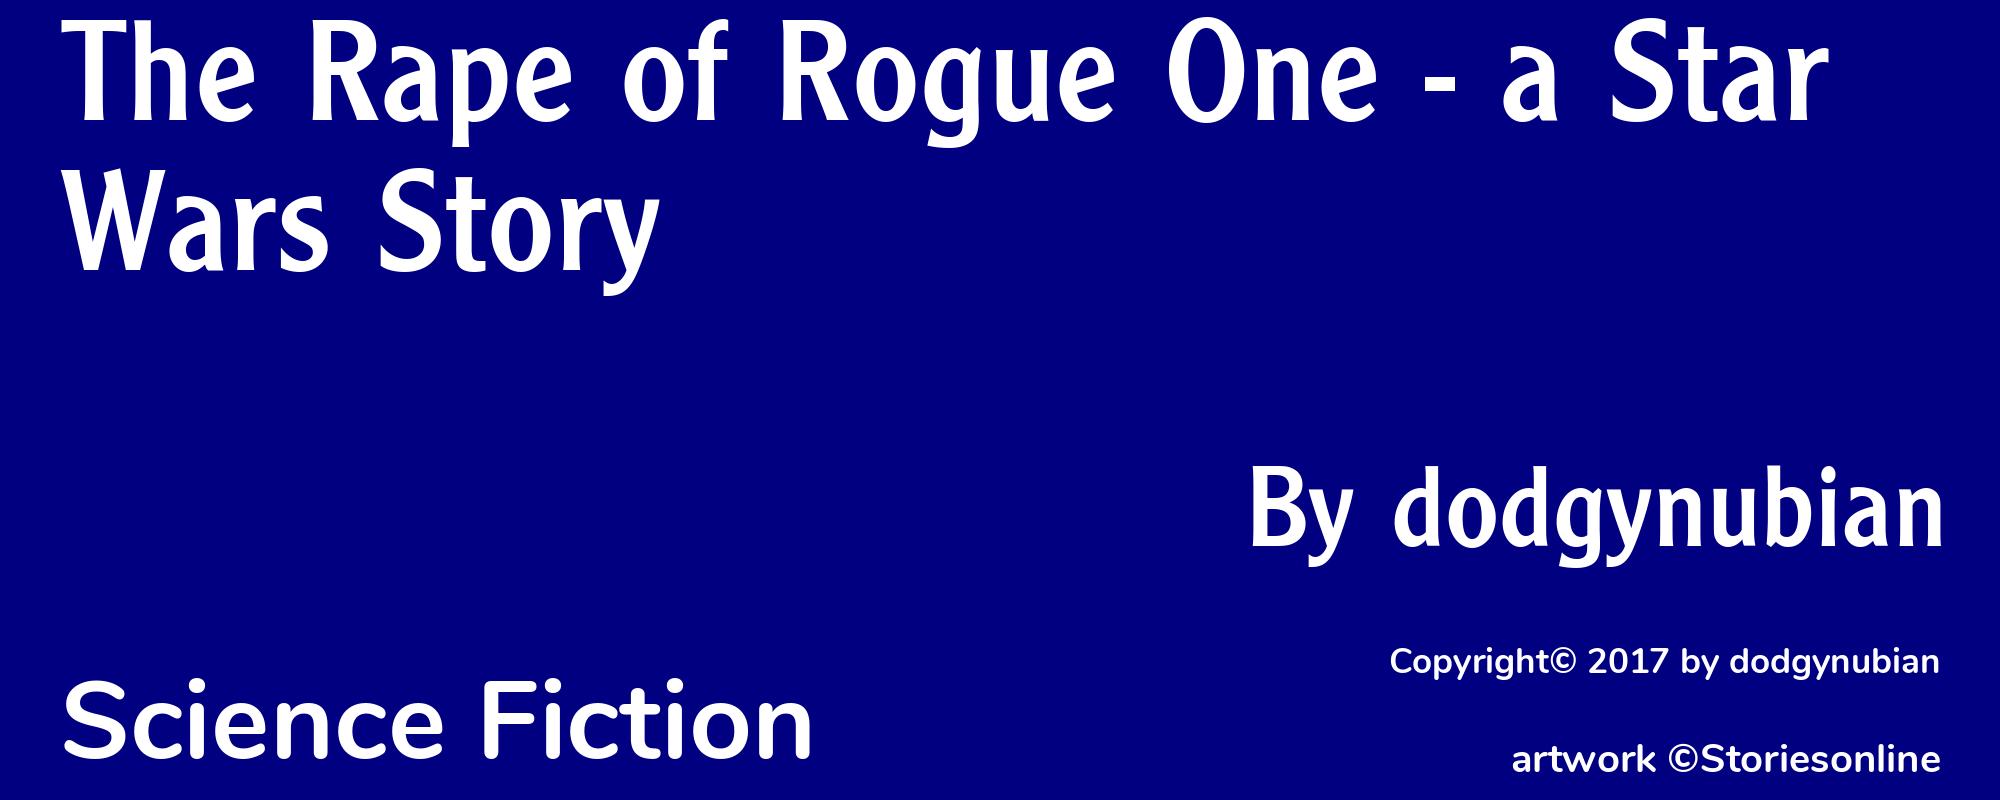 The Rape of Rogue One - a Star Wars Story - Cover